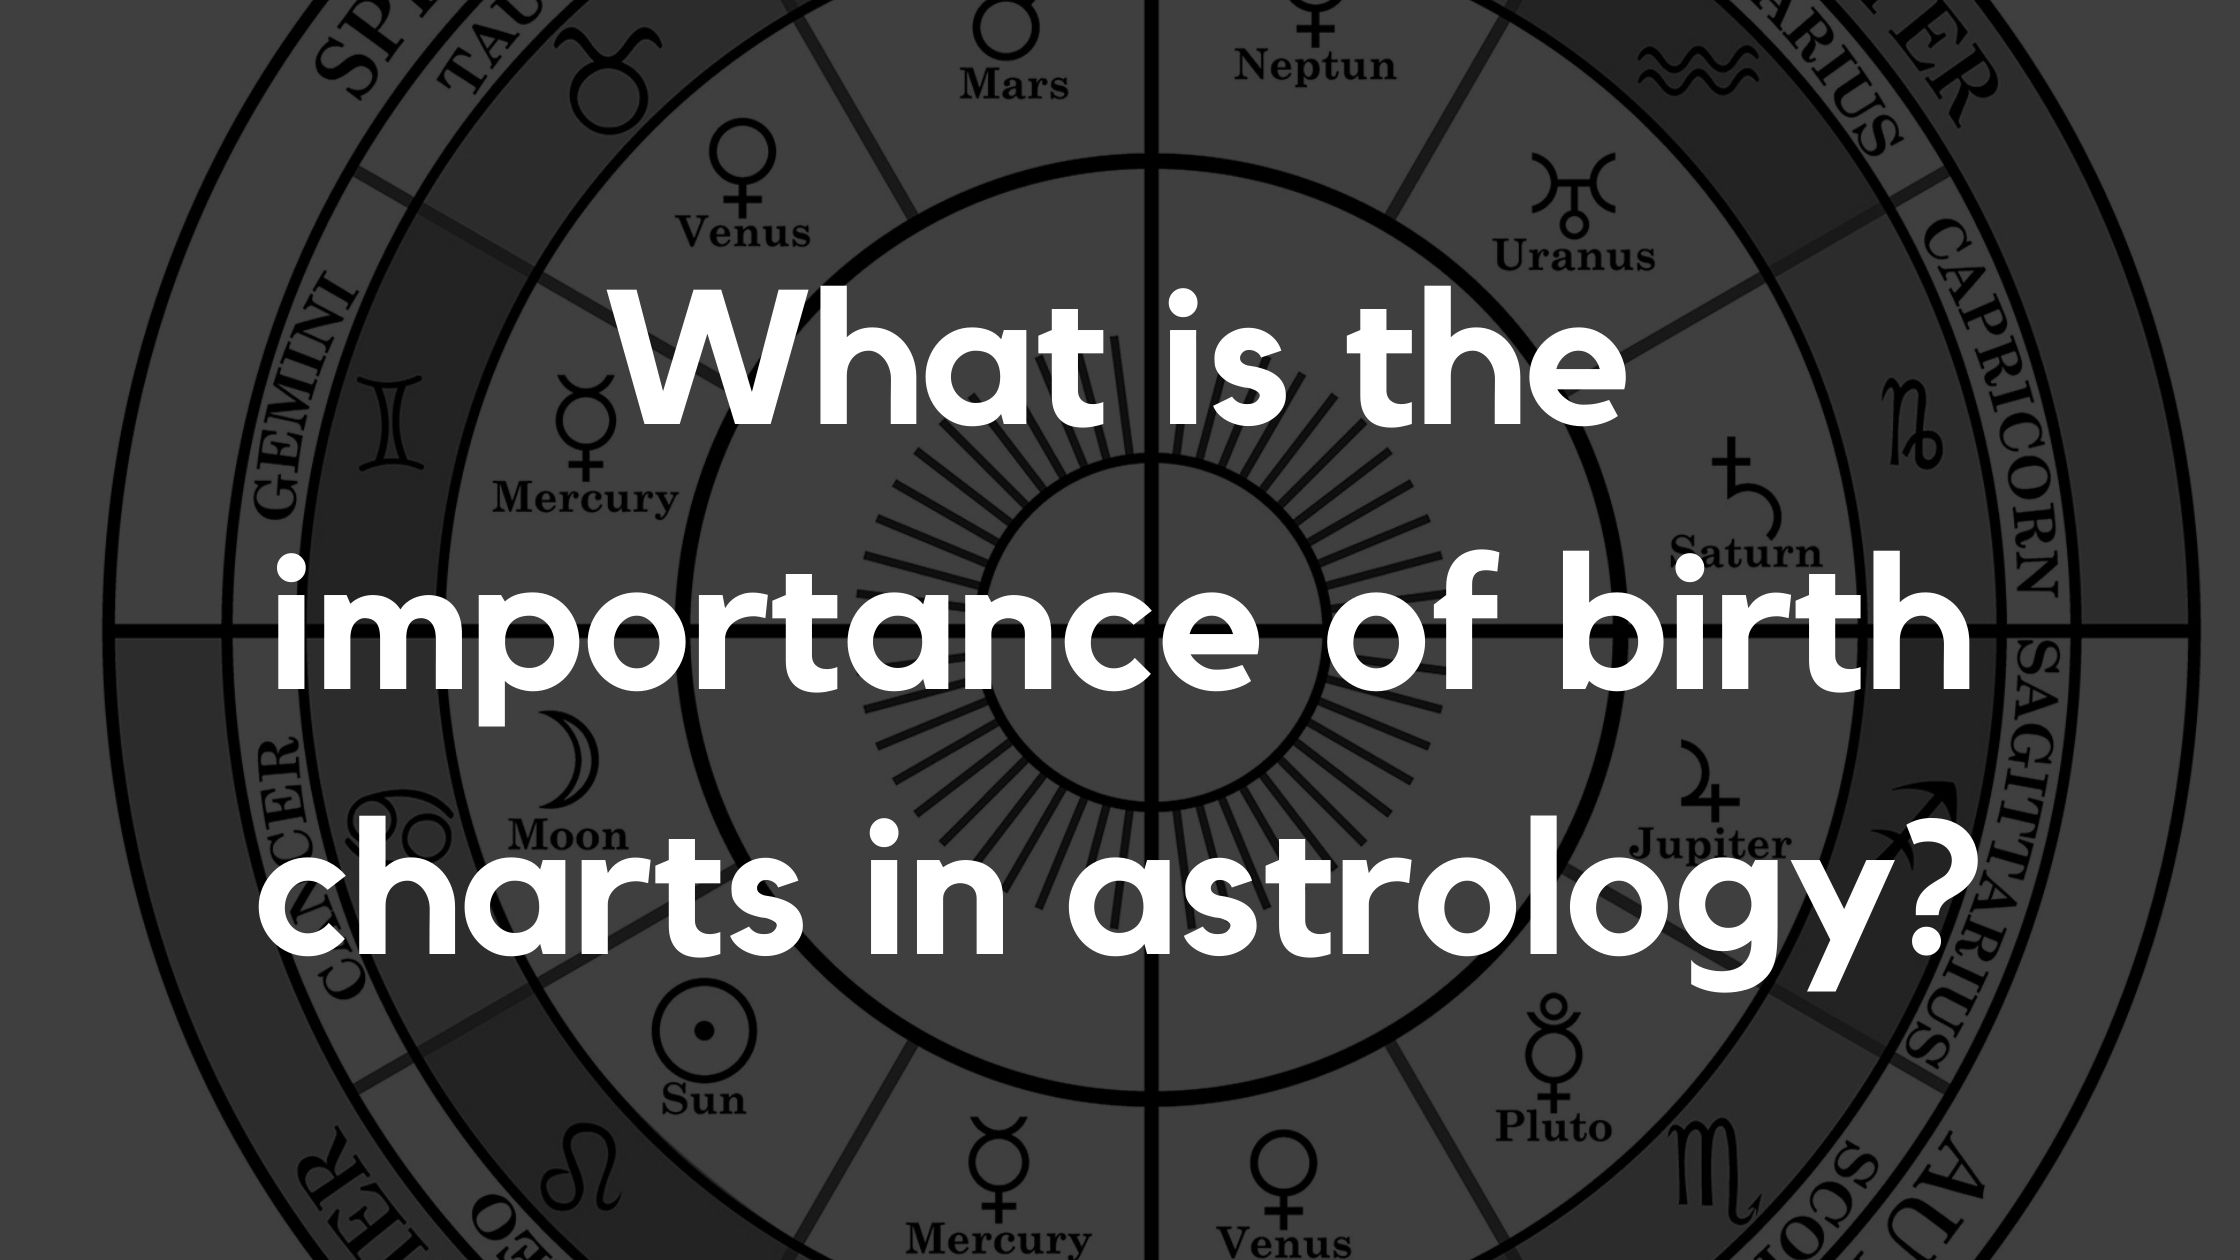 What is the importance of birth chart in astrology?